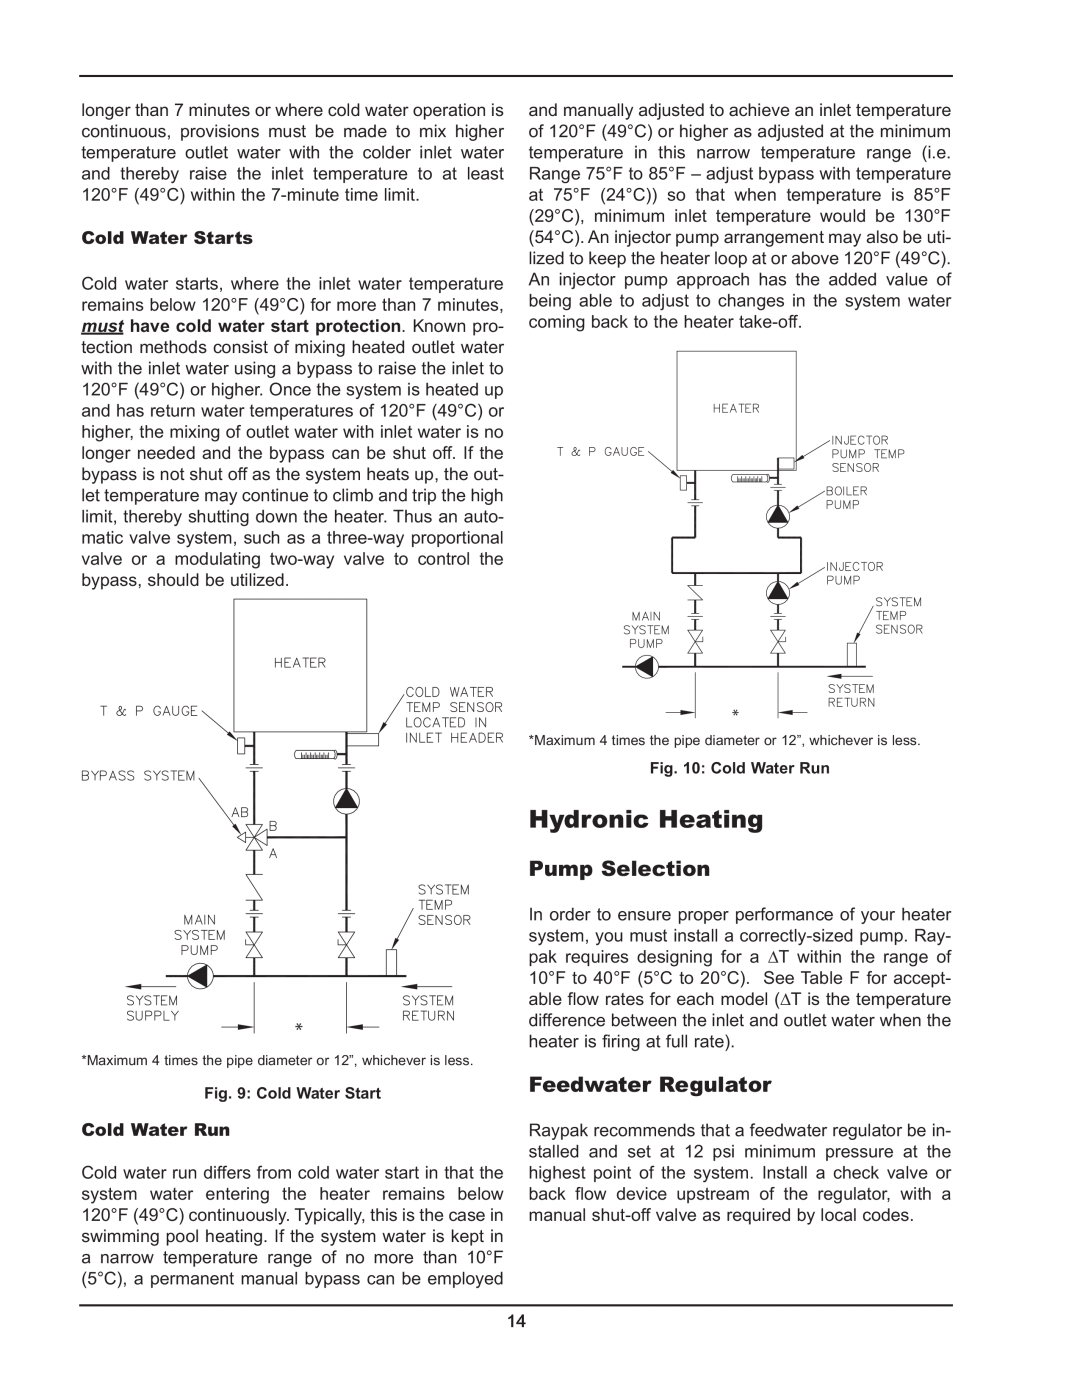 Raypak 5042004 Hydronic Heating, Pump Selection, Feedwater Regulator, Cold Water Starts, Cold Water Run 